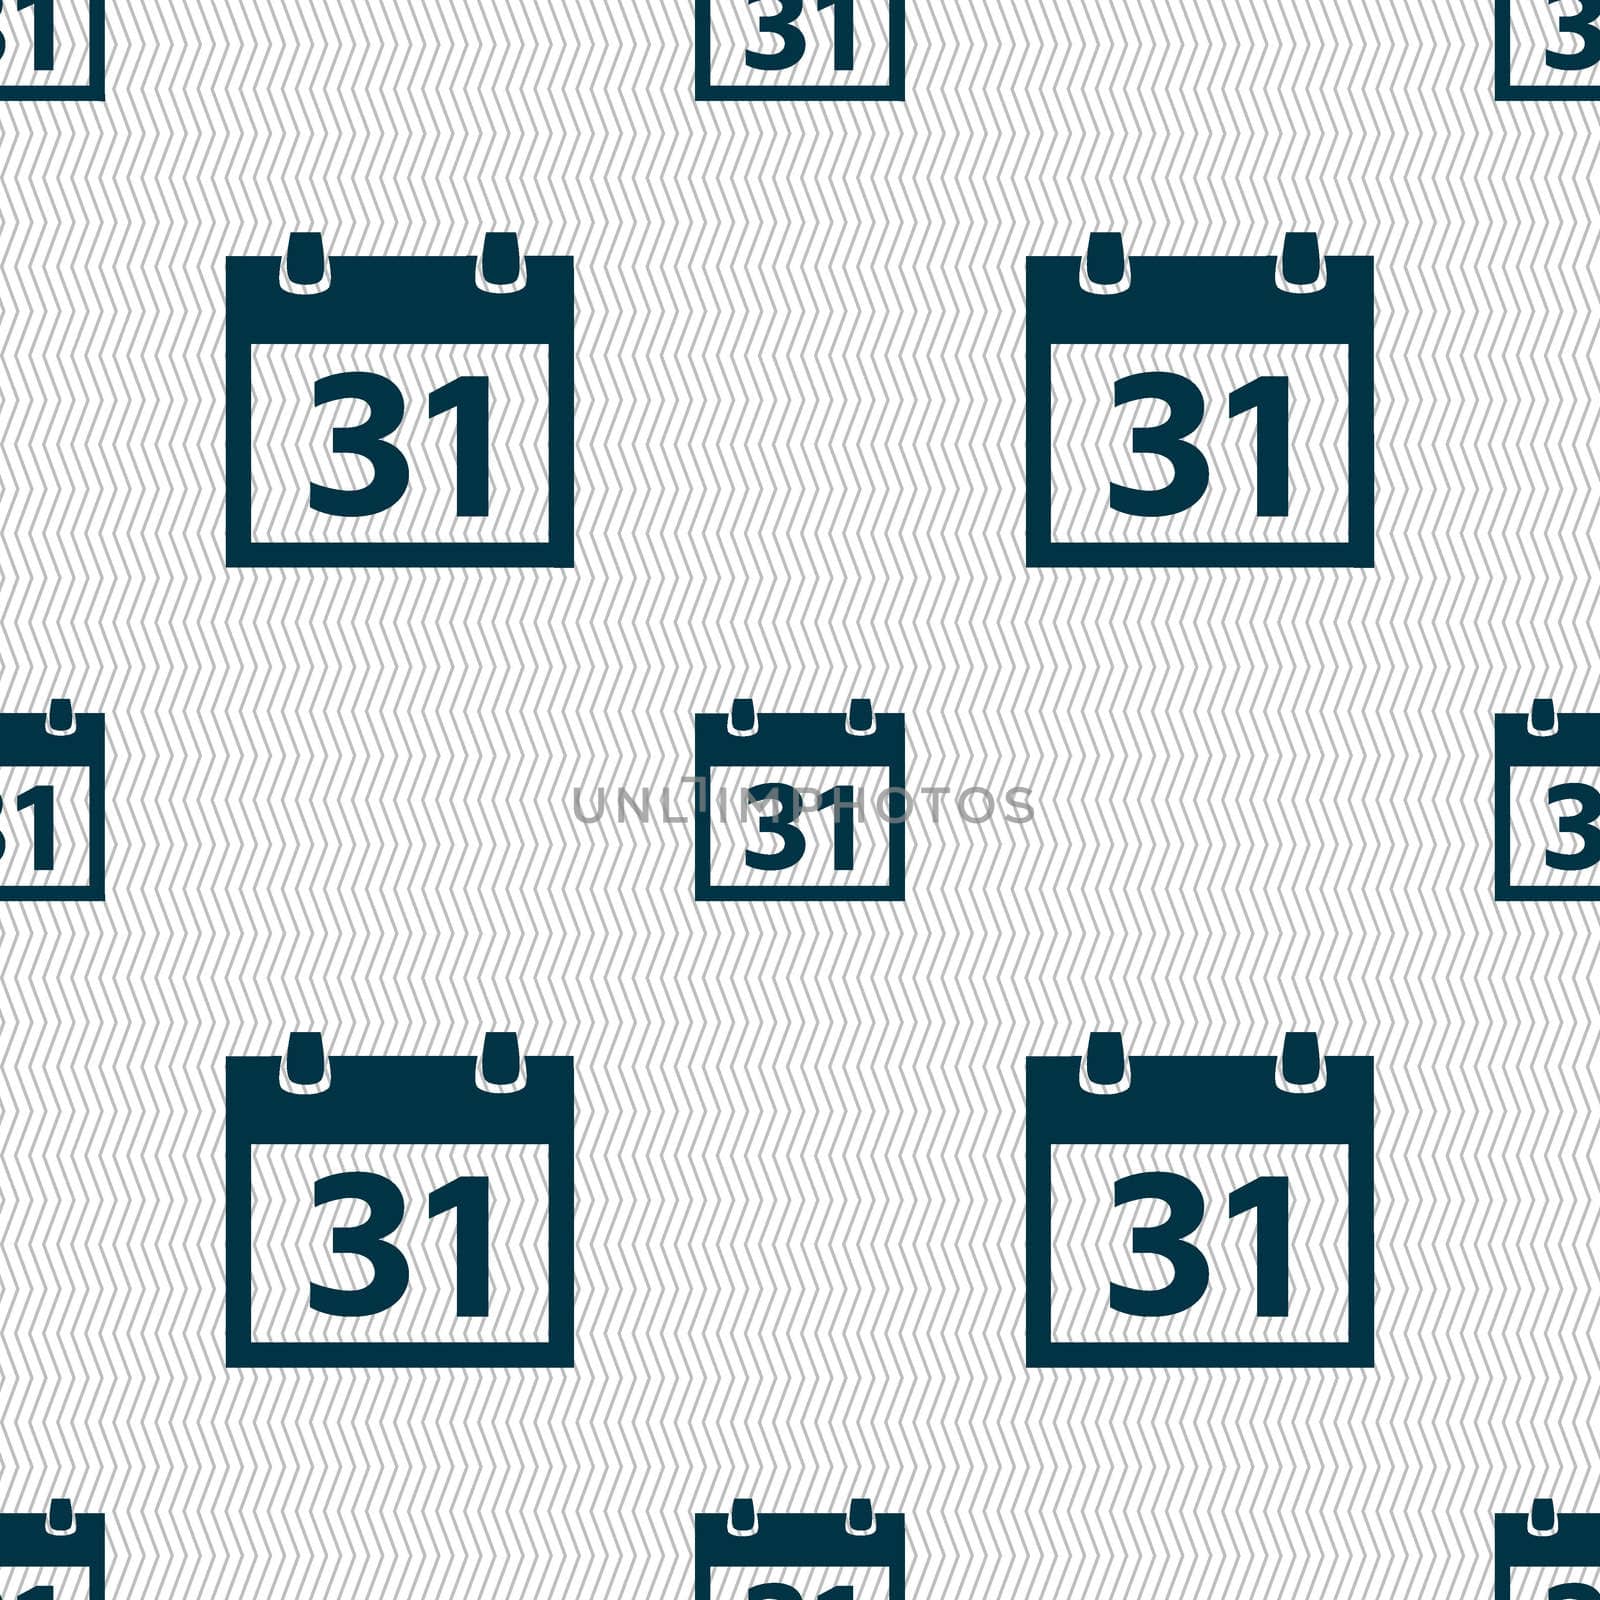 Calendar sign icon. 31 day month symbol. Date button. Seamless abstract background with geometric shapes. illustration